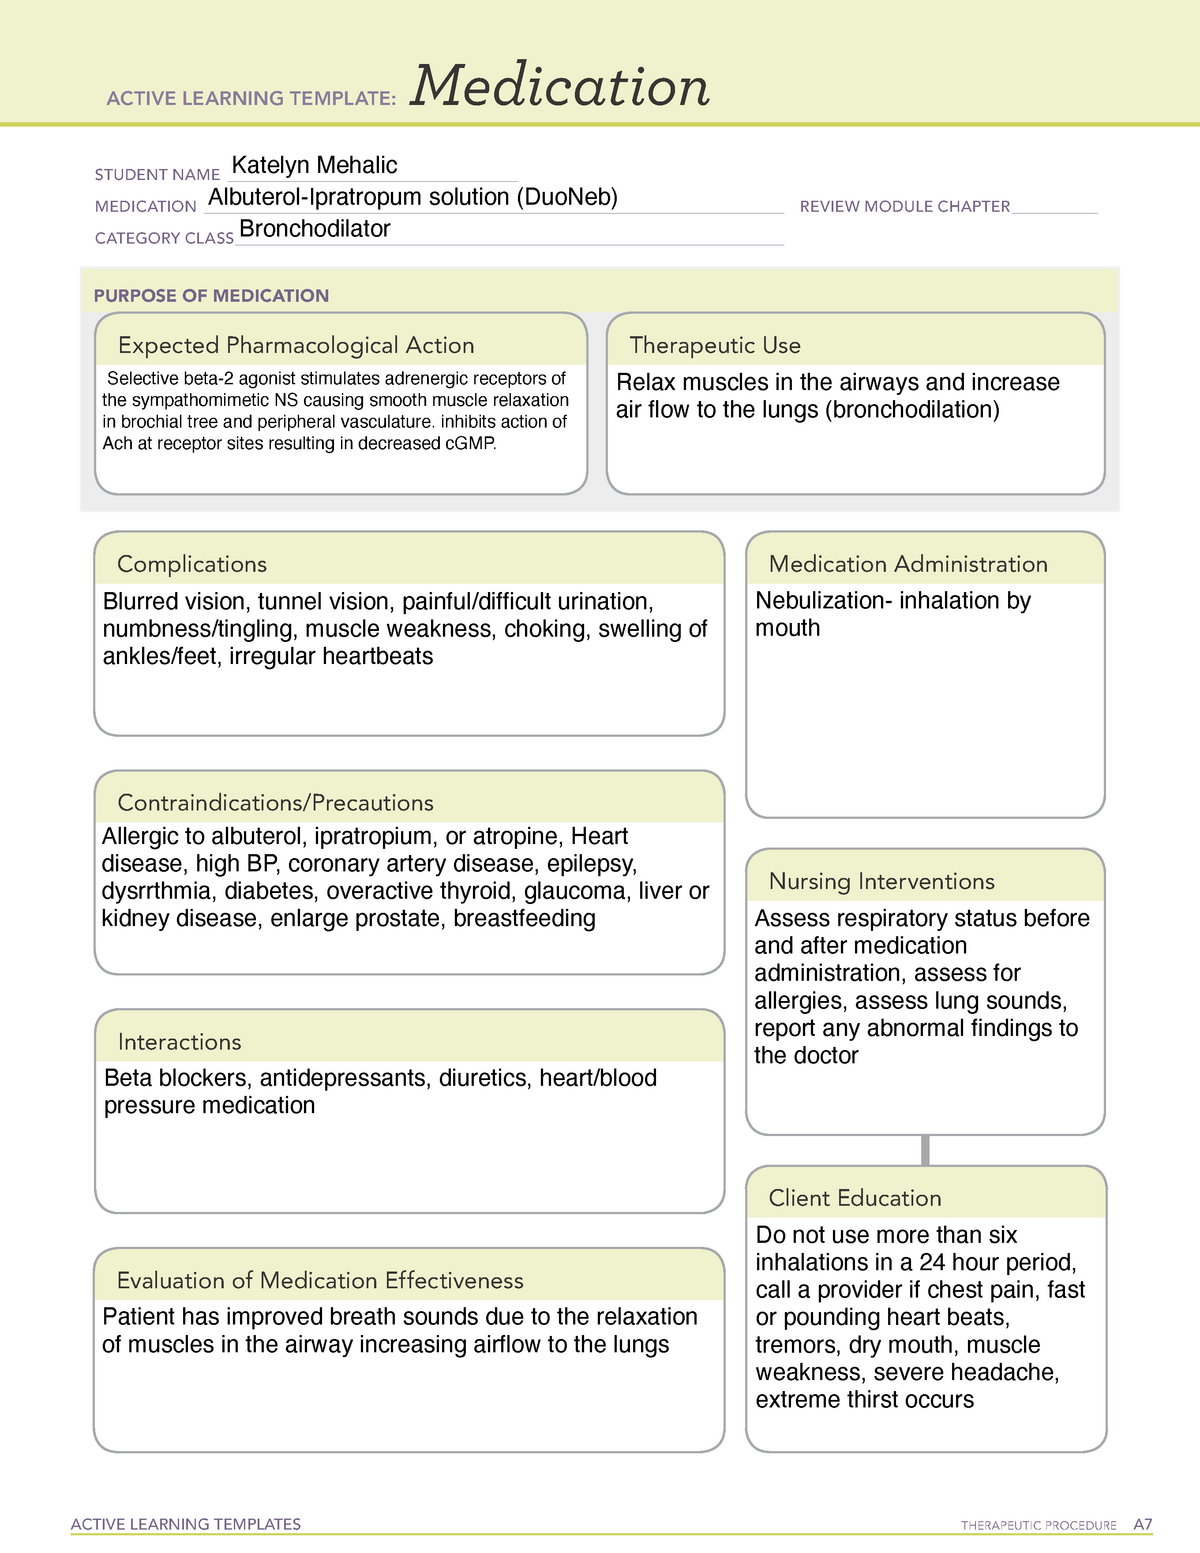 duo-neb-adult-1-ati-assignments-active-learning-templates